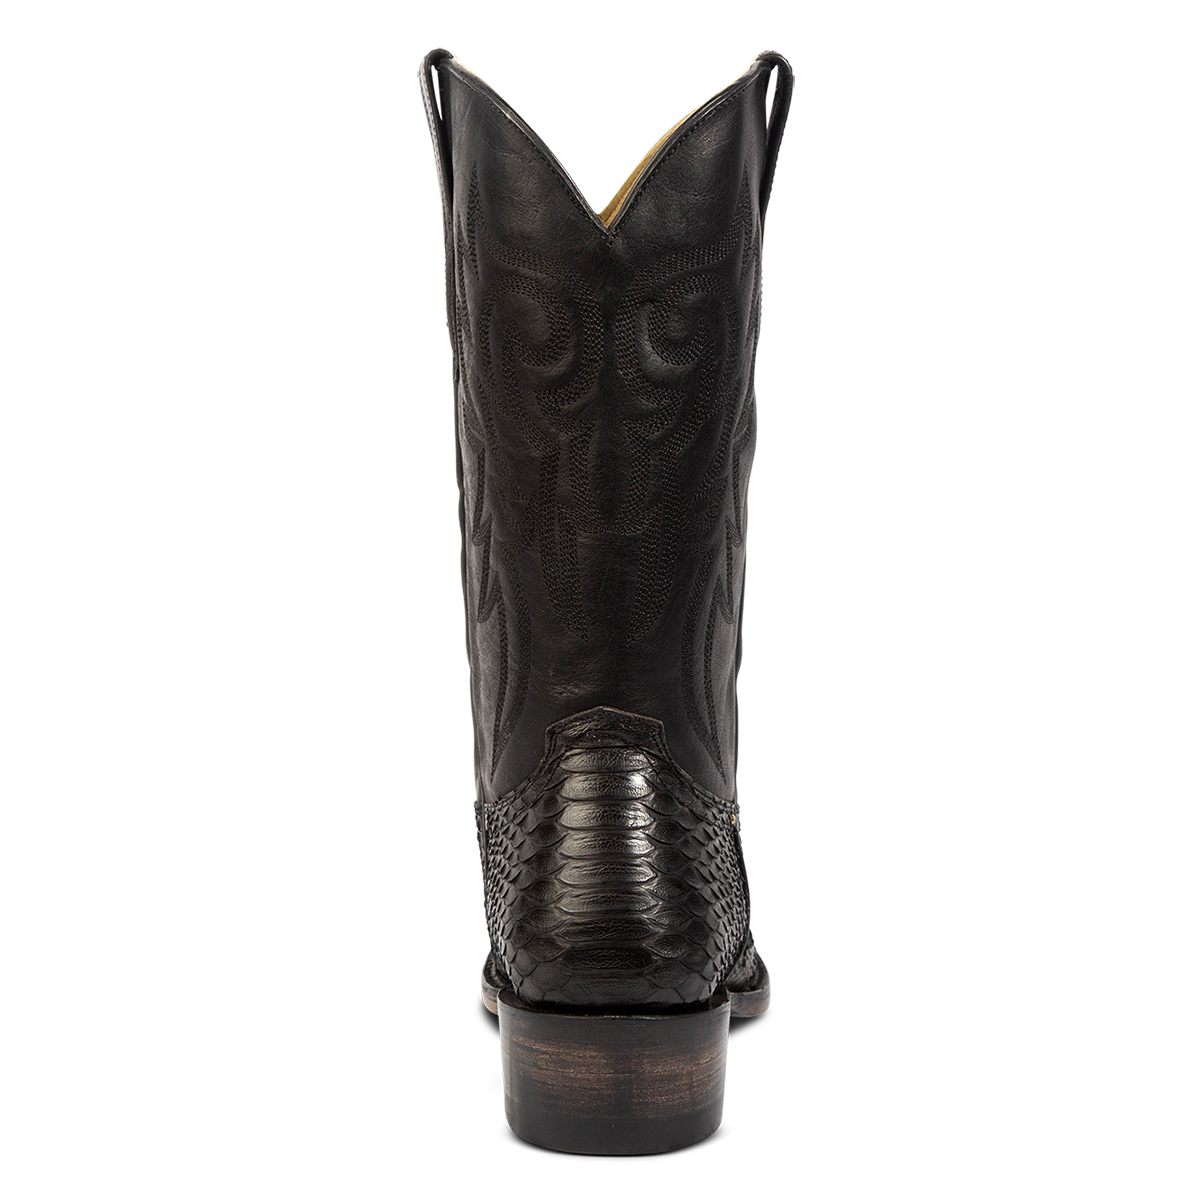 Back view showing FREEBIRD men's Marshall black python leather western cowboy boot with shaft stitch detailing, snip toe construction and leather pull straps